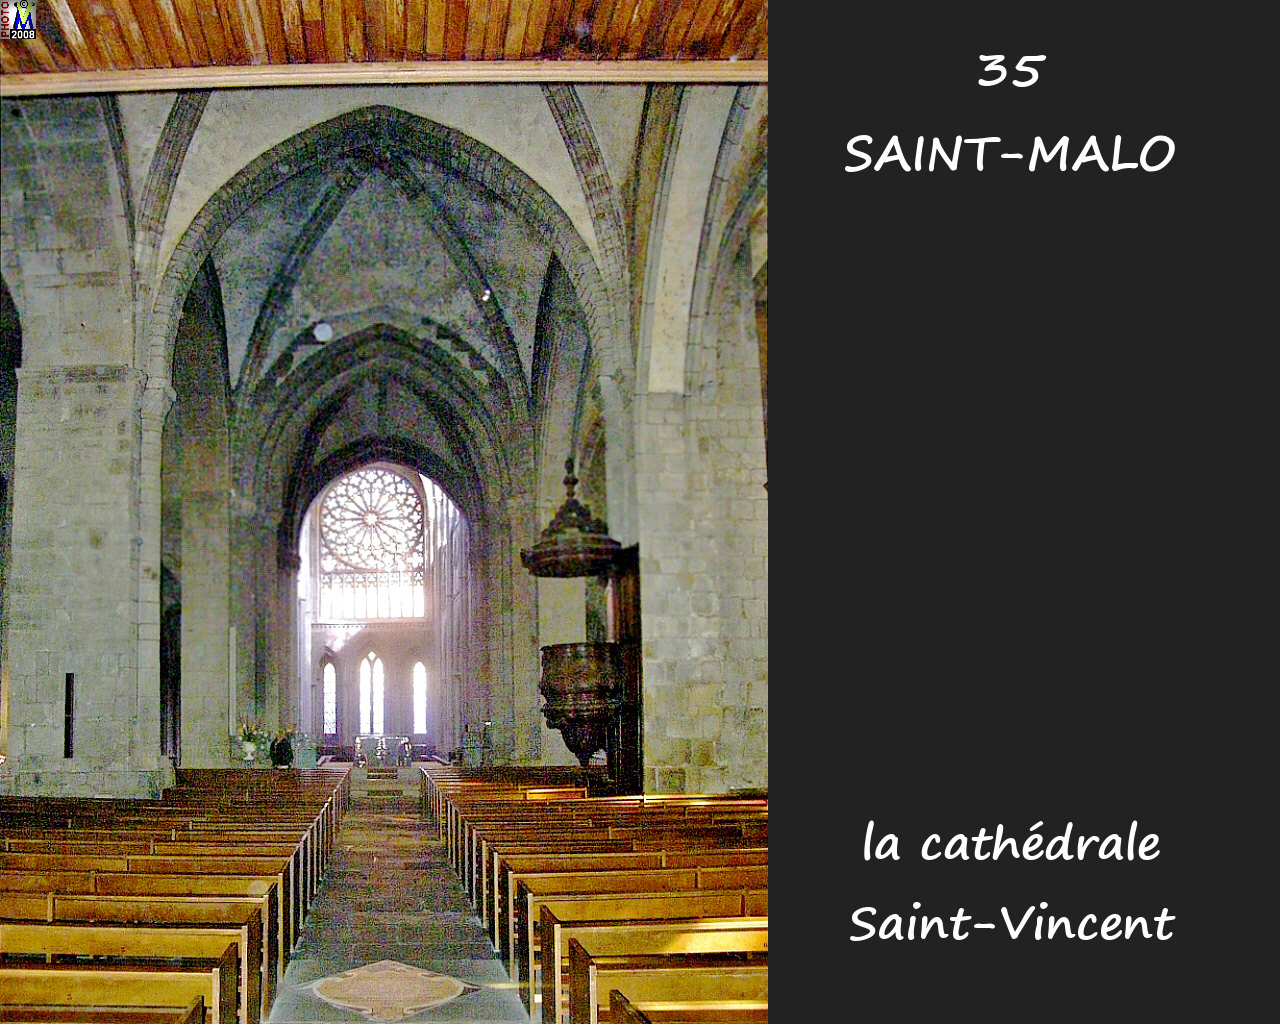 35StMALO_cathedrale_200.jpg